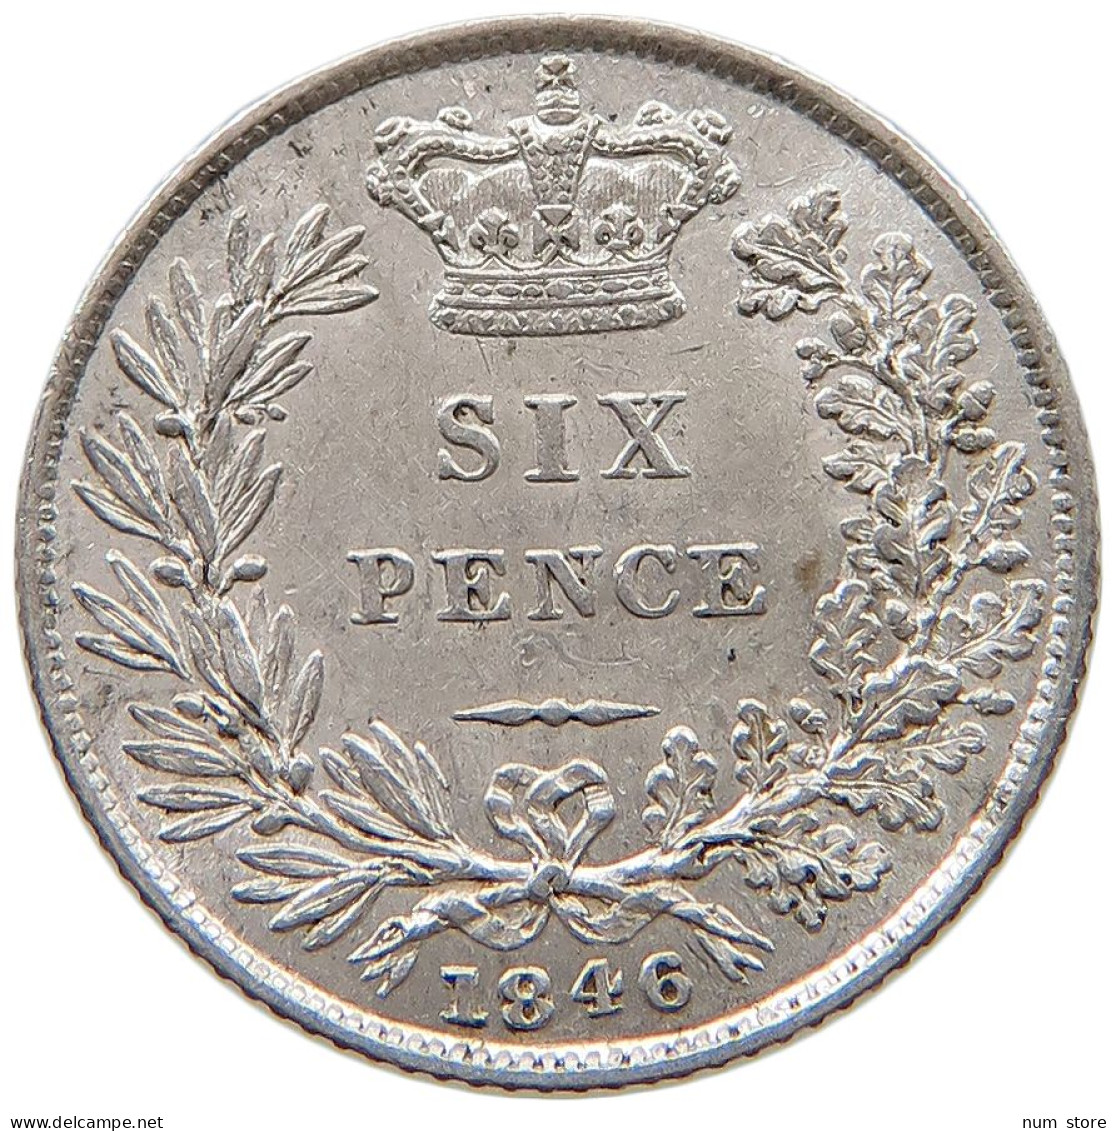 GREAT BRITAIN SIXPENCE 1846 Victoria 1837-1901 #t118 1165 - H. 6 Pence